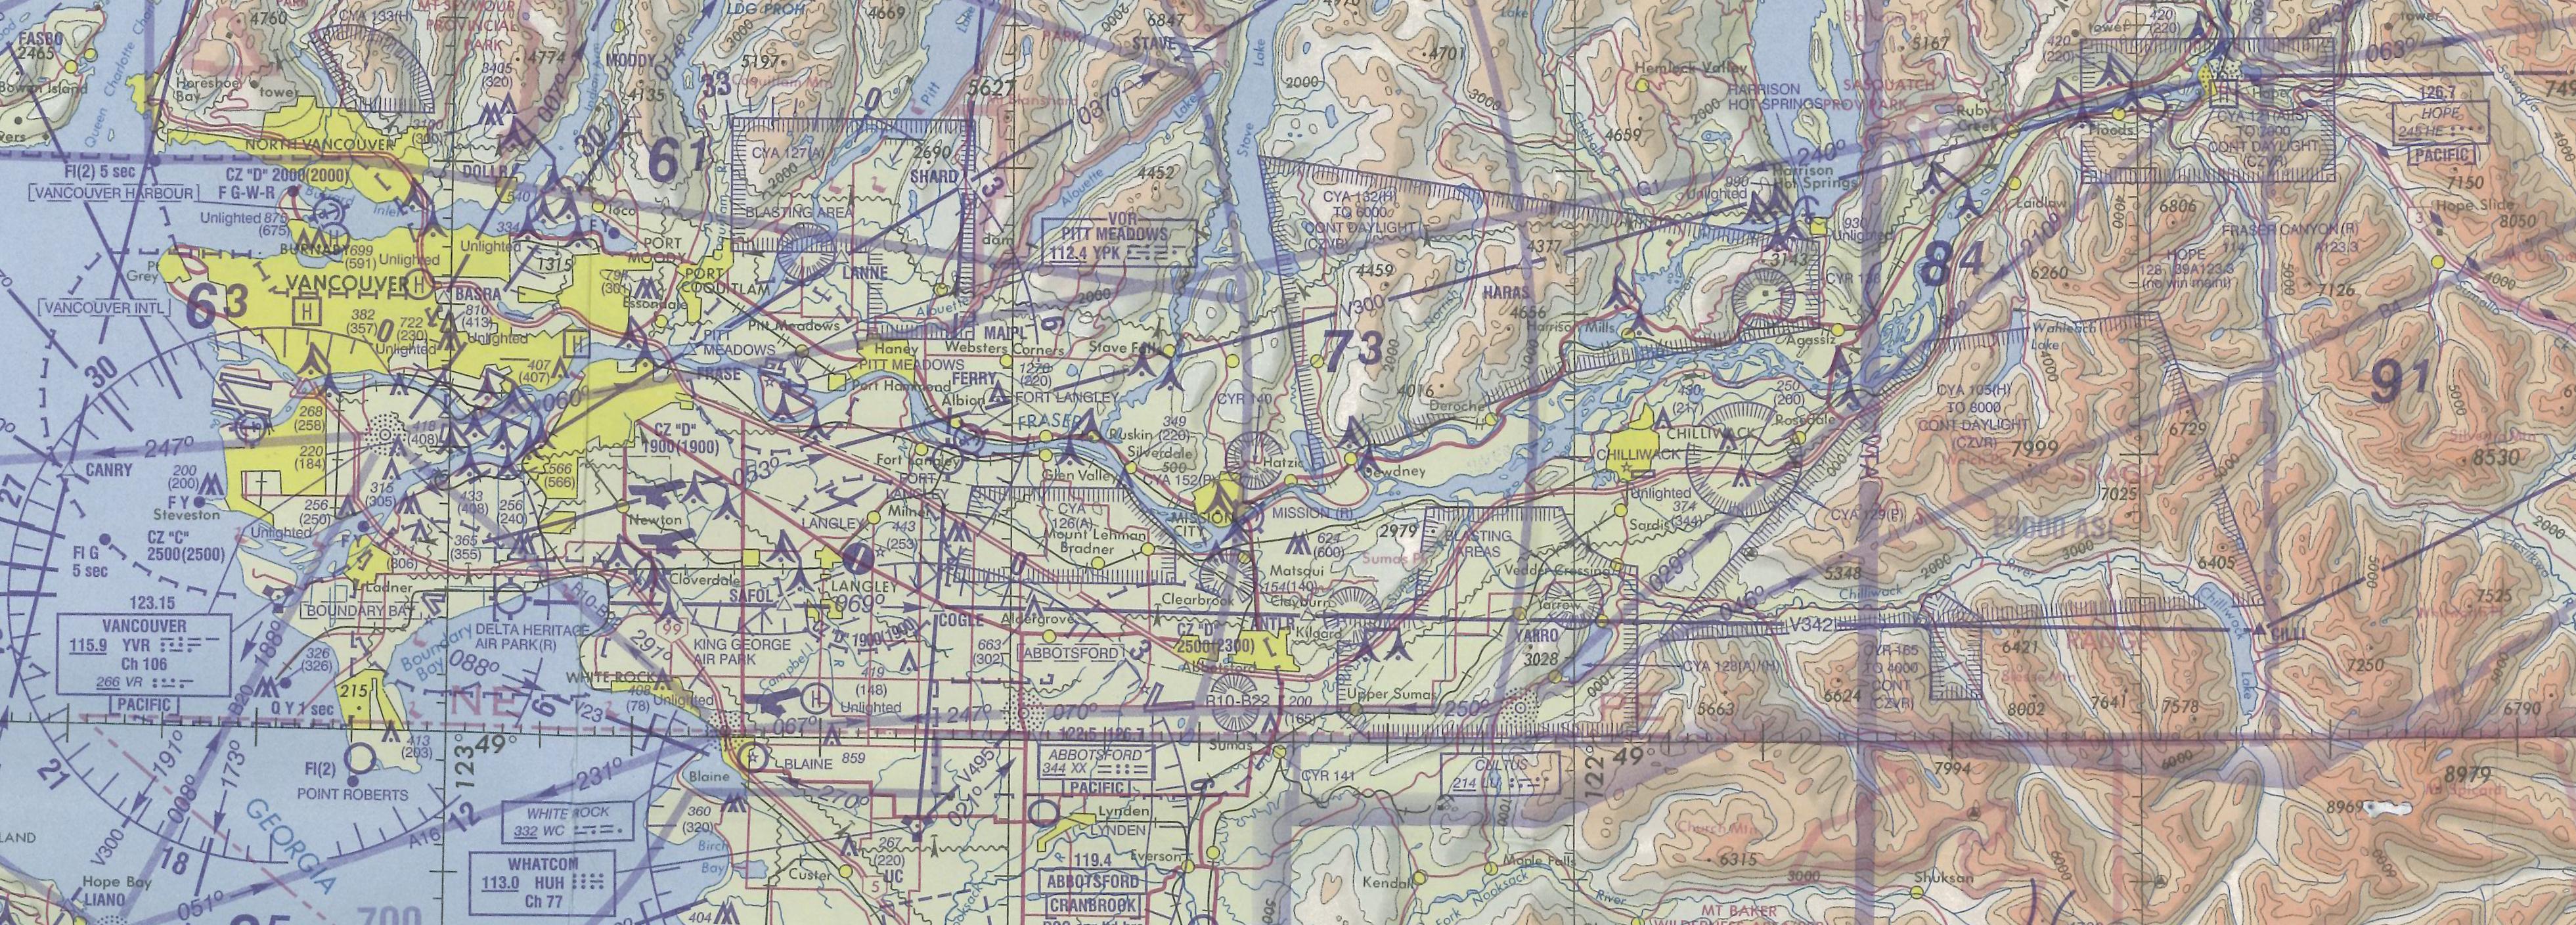 Vancouver to Chilliwack, Langley Flying School's Map Room